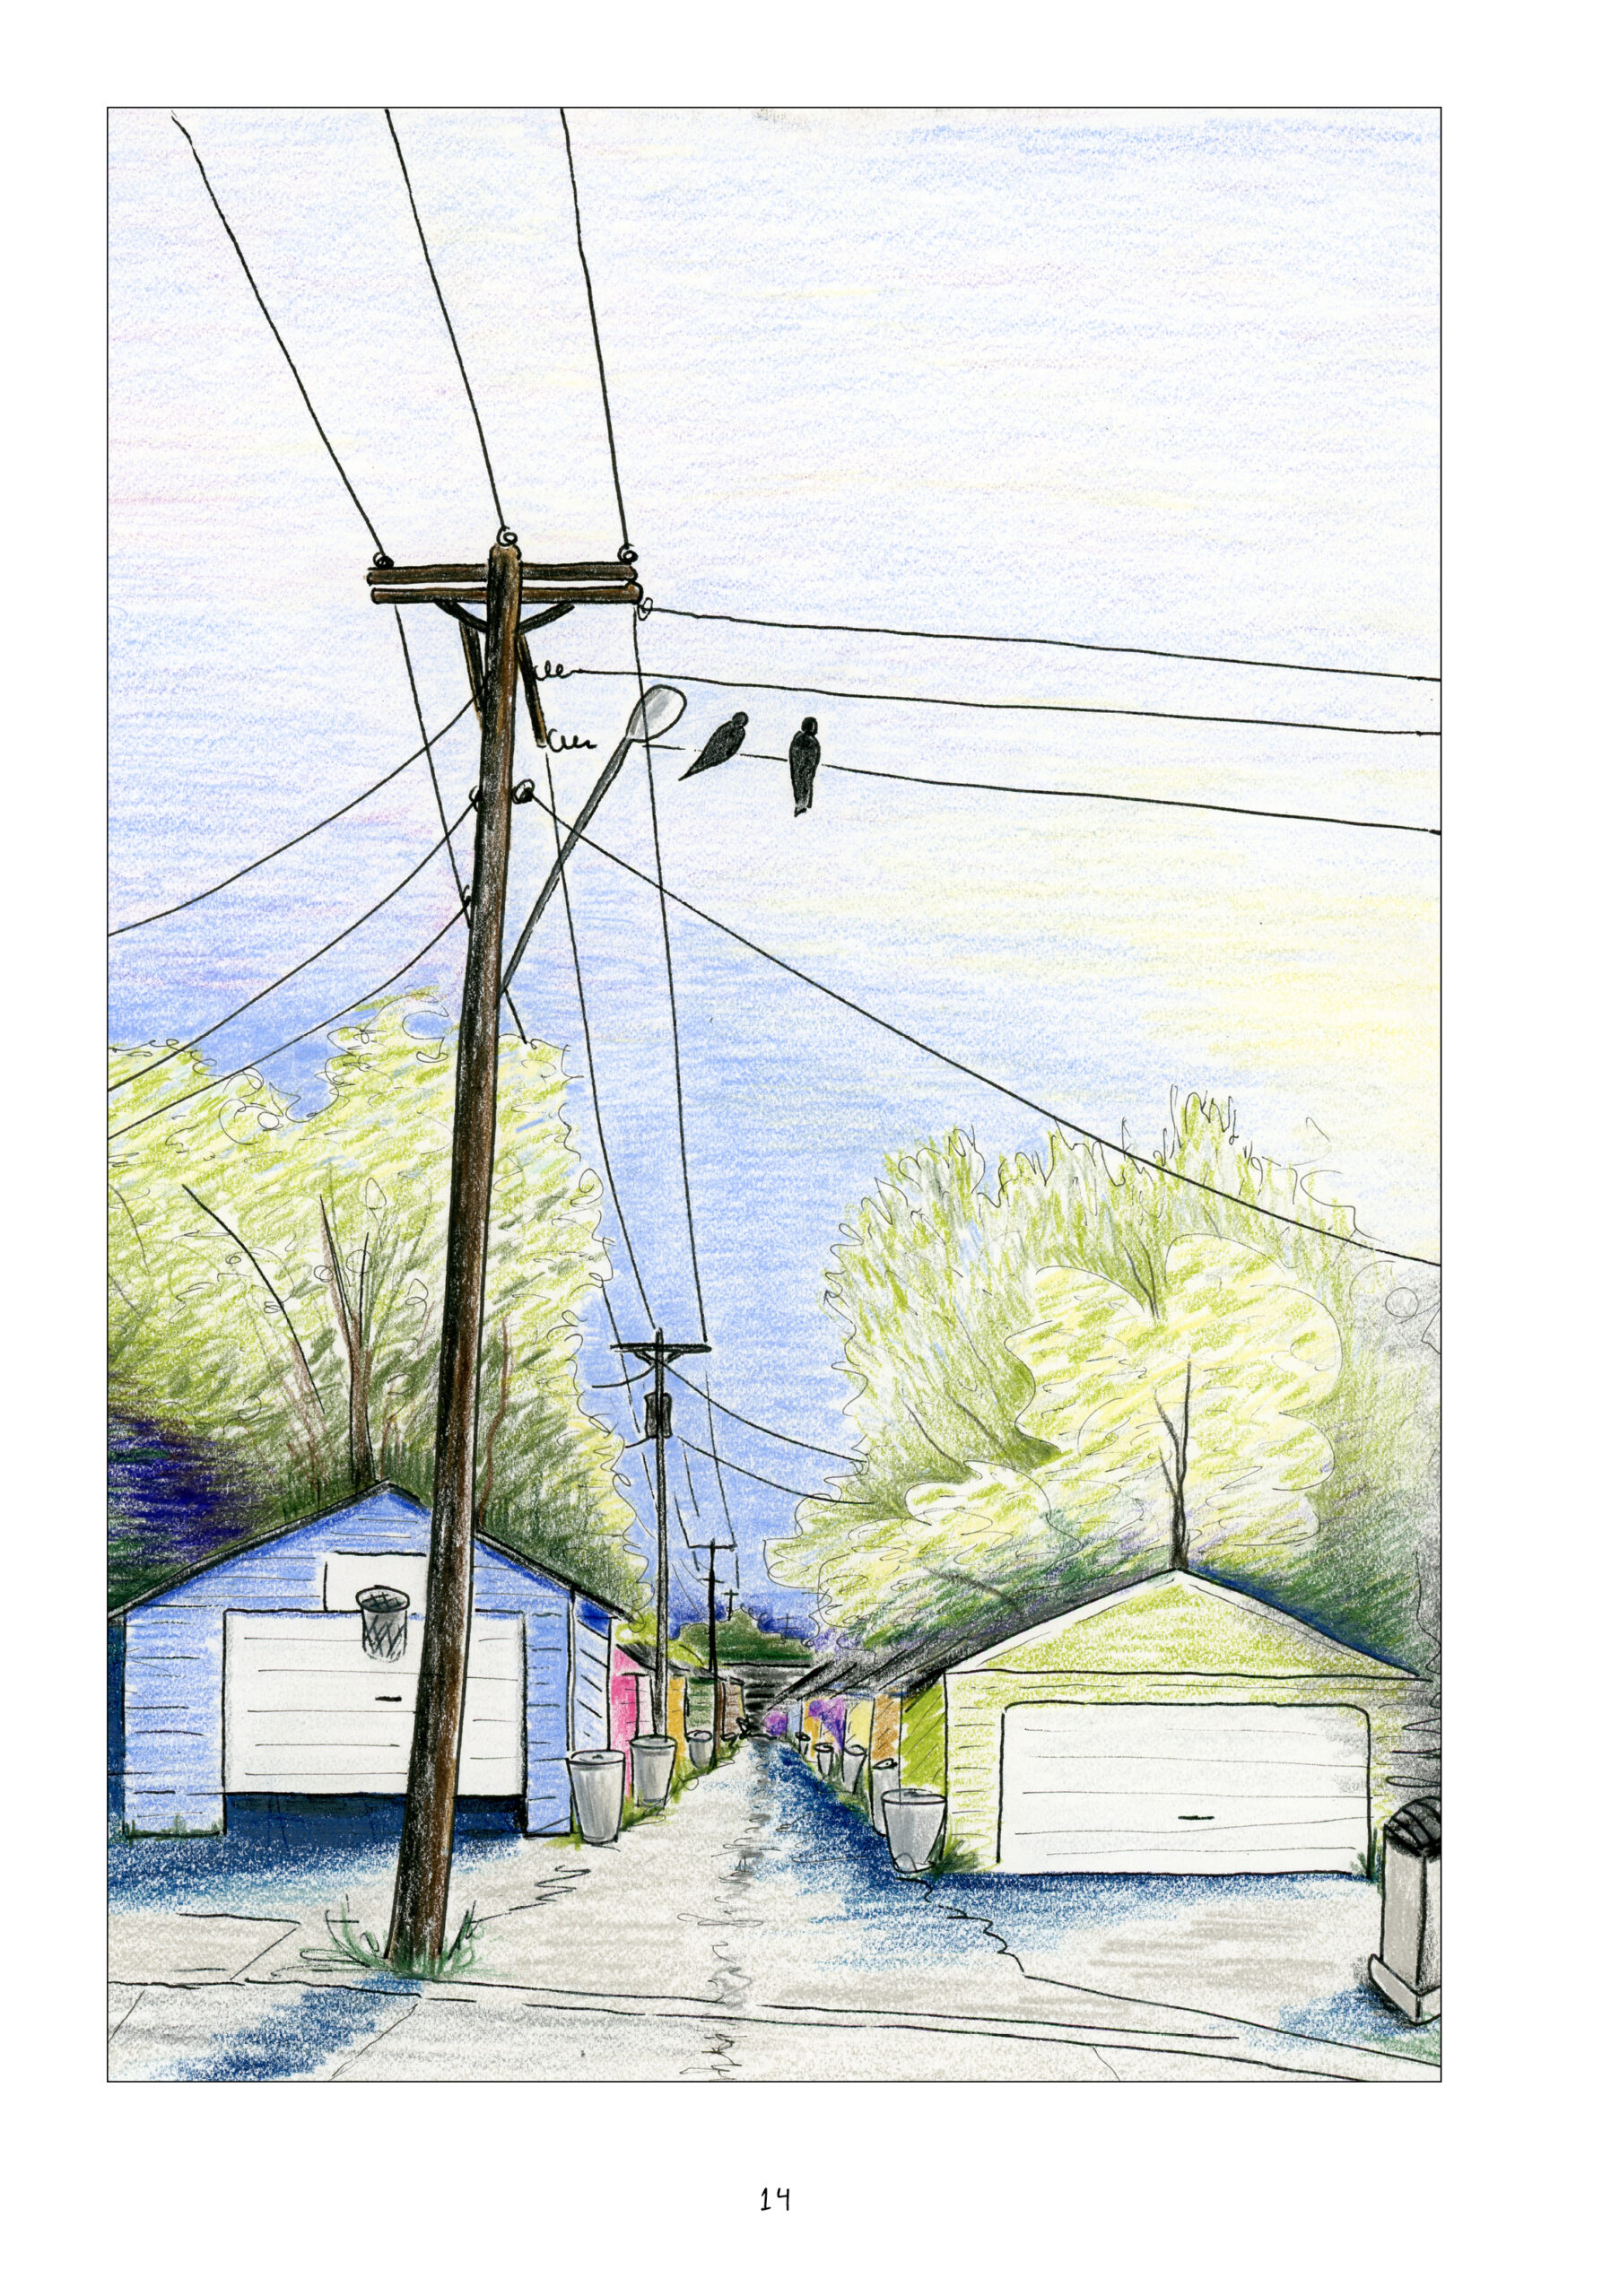 A full page image in full color of a street in one-point perspective, with power lines stretching above a line of brightly colored houses with garbage cans parked out front. The lighting suggests it is perhaps morning time. 